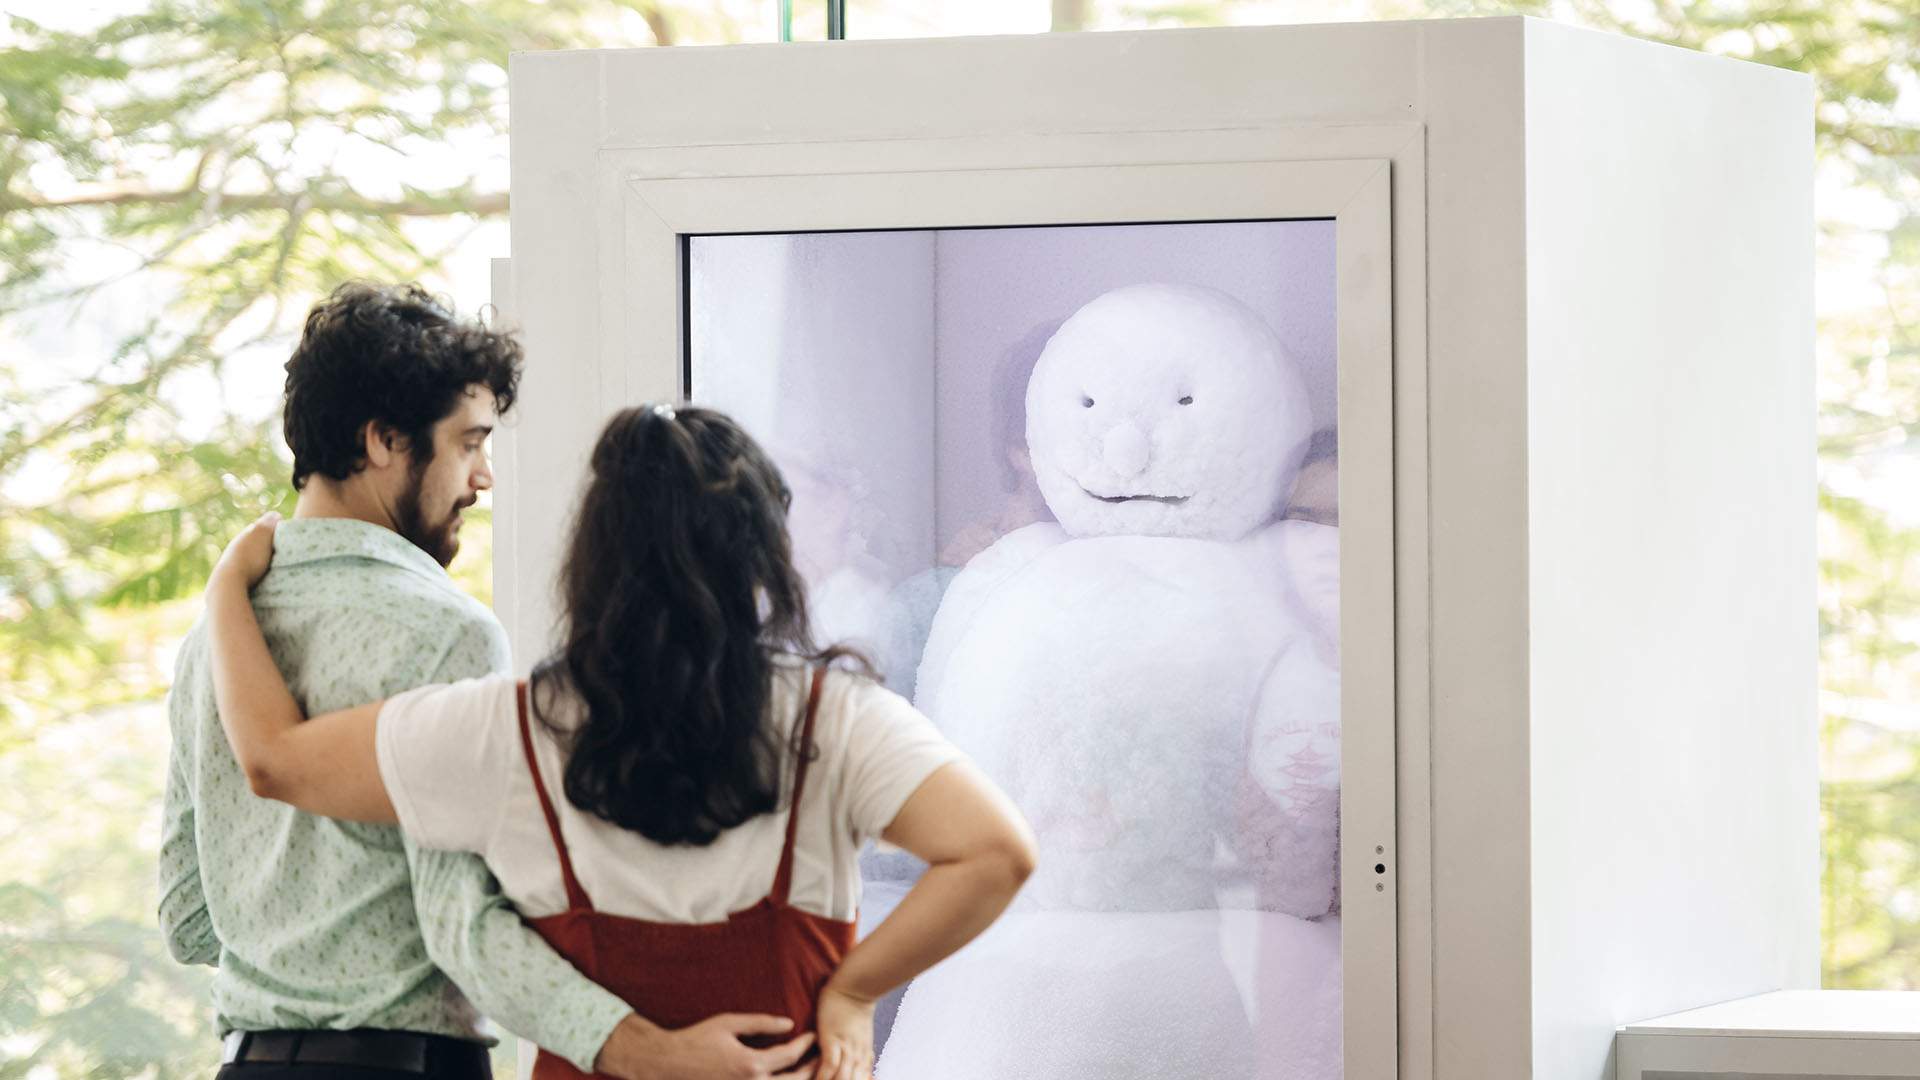 Queensland Art Gallery Is Now Home to a Permanent (and Very Real) Snowman